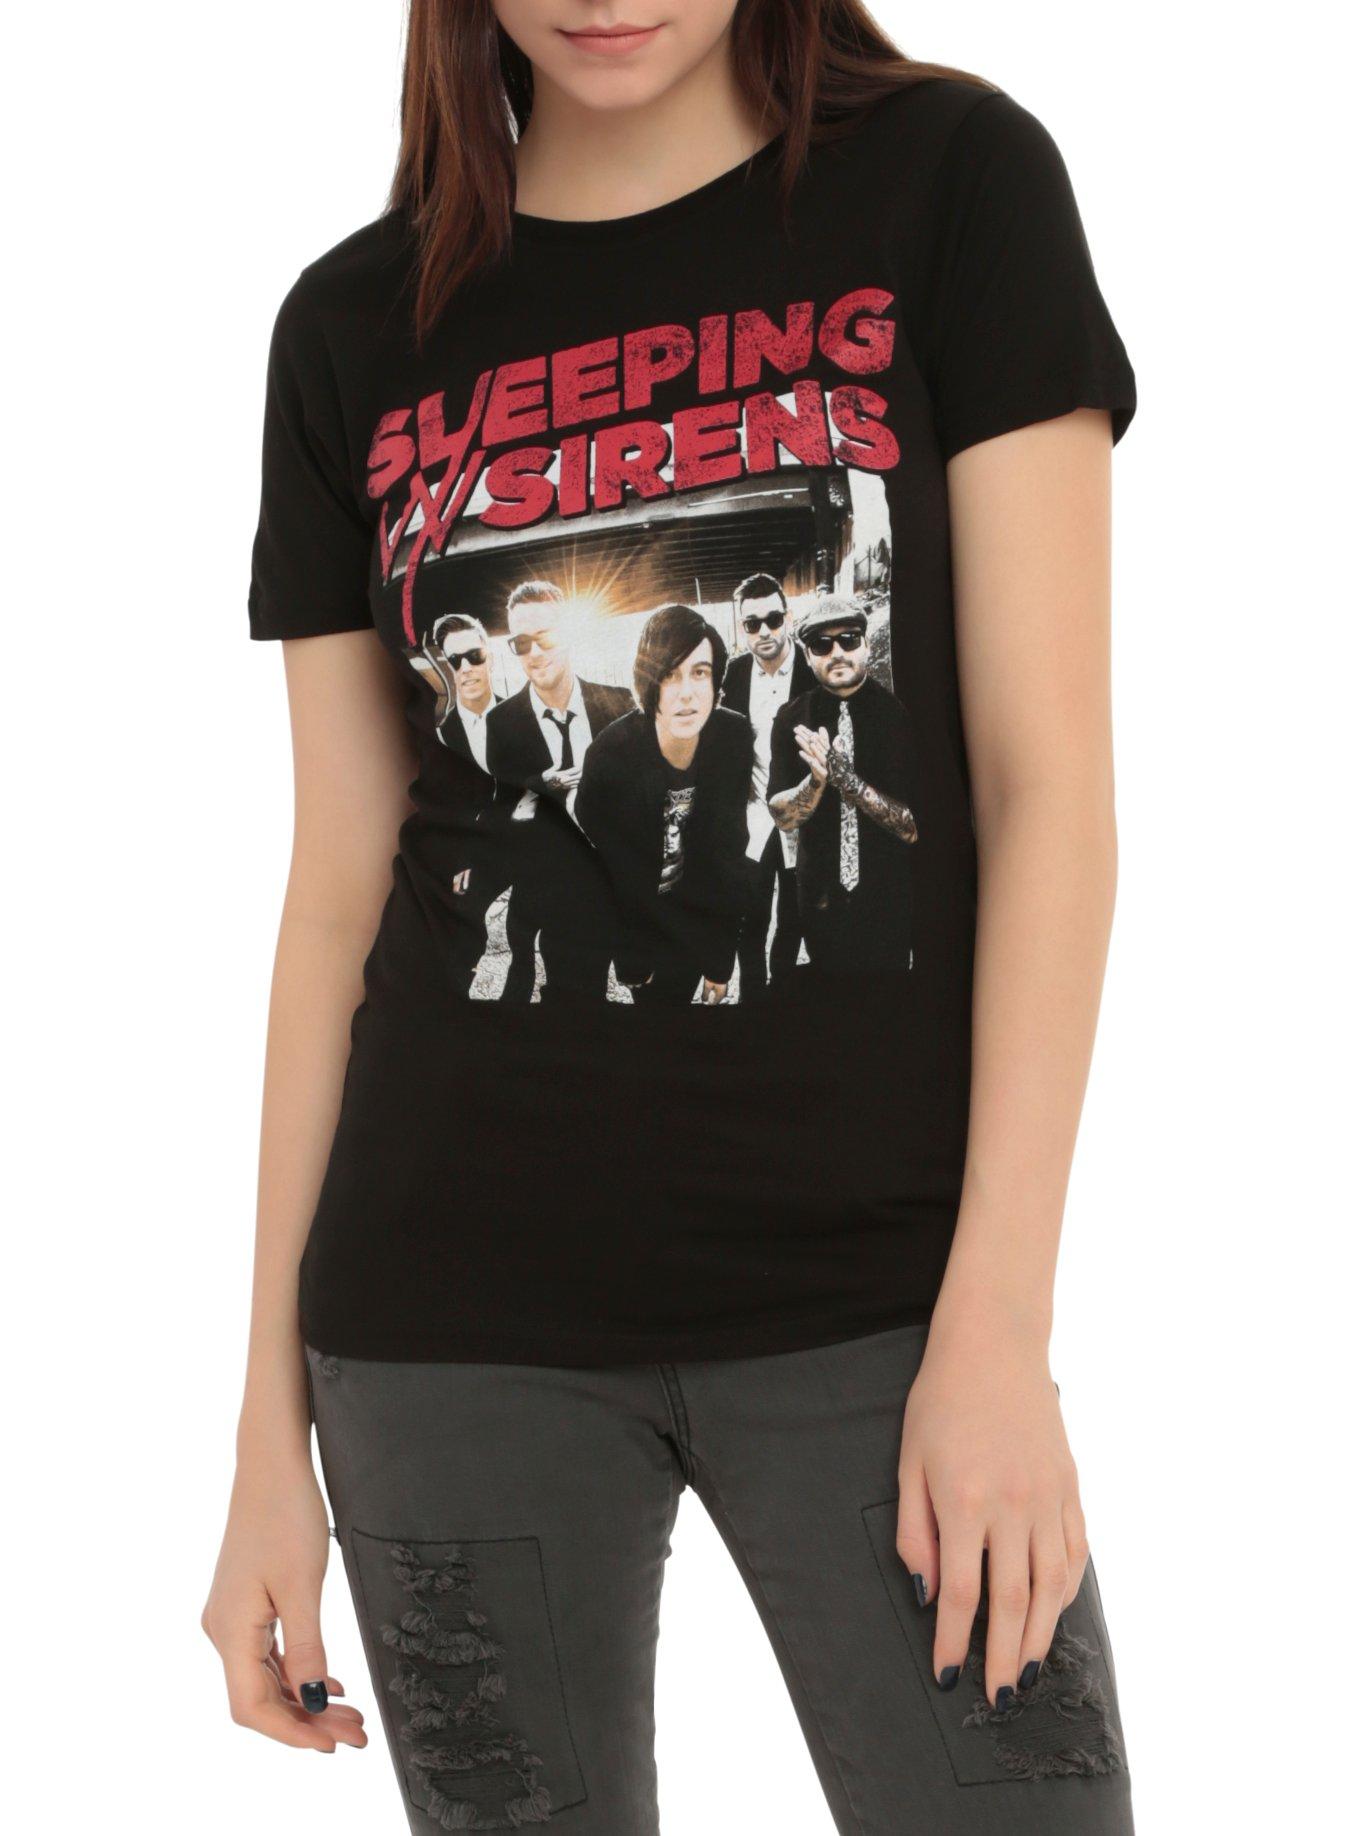 Sleeping With Sirens Suits Girls T-Shirt, BLACK, hi-res